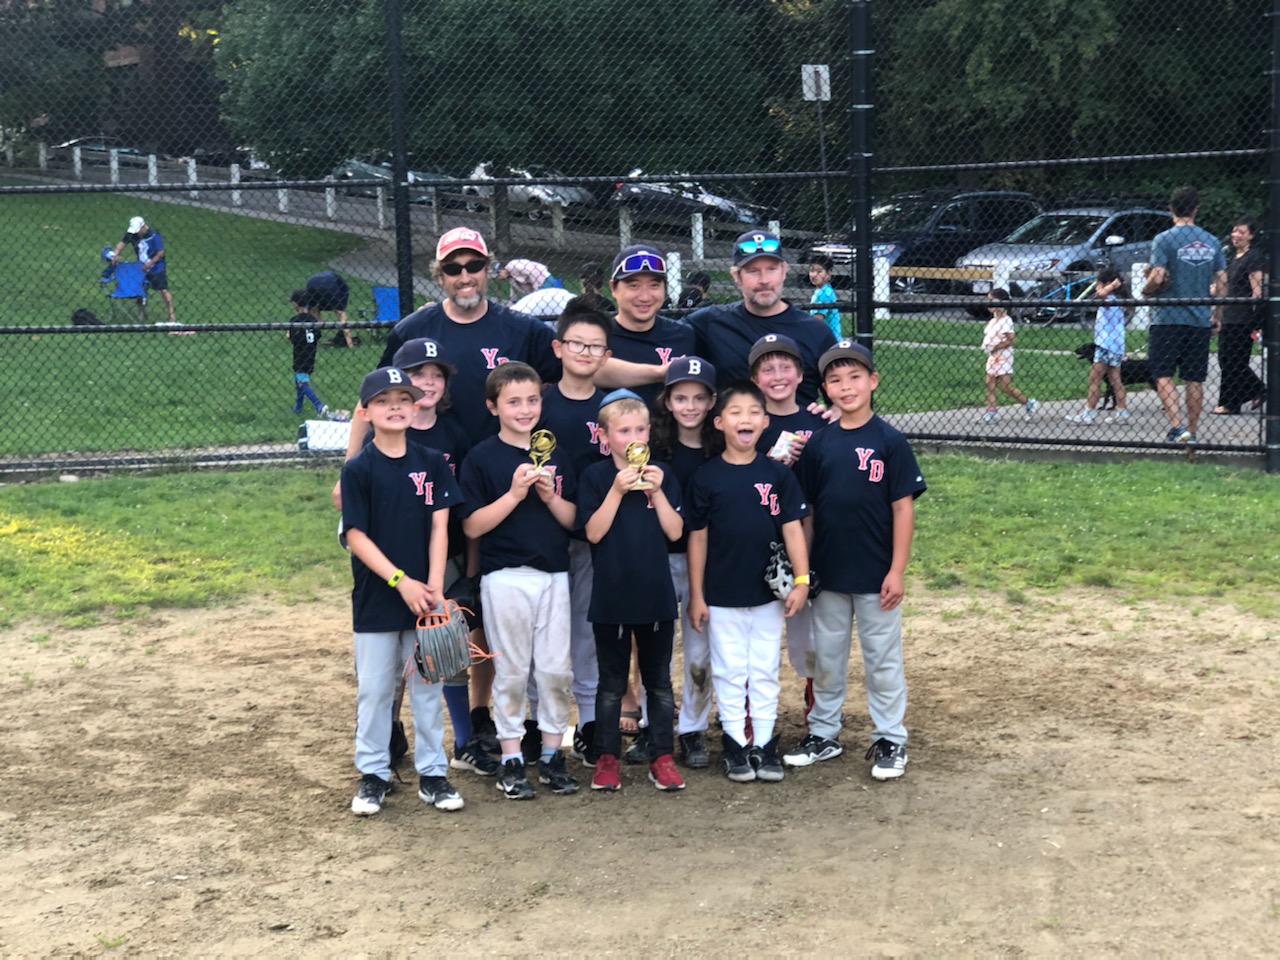 YD Sox - 2021 Summer Minors Champs!!